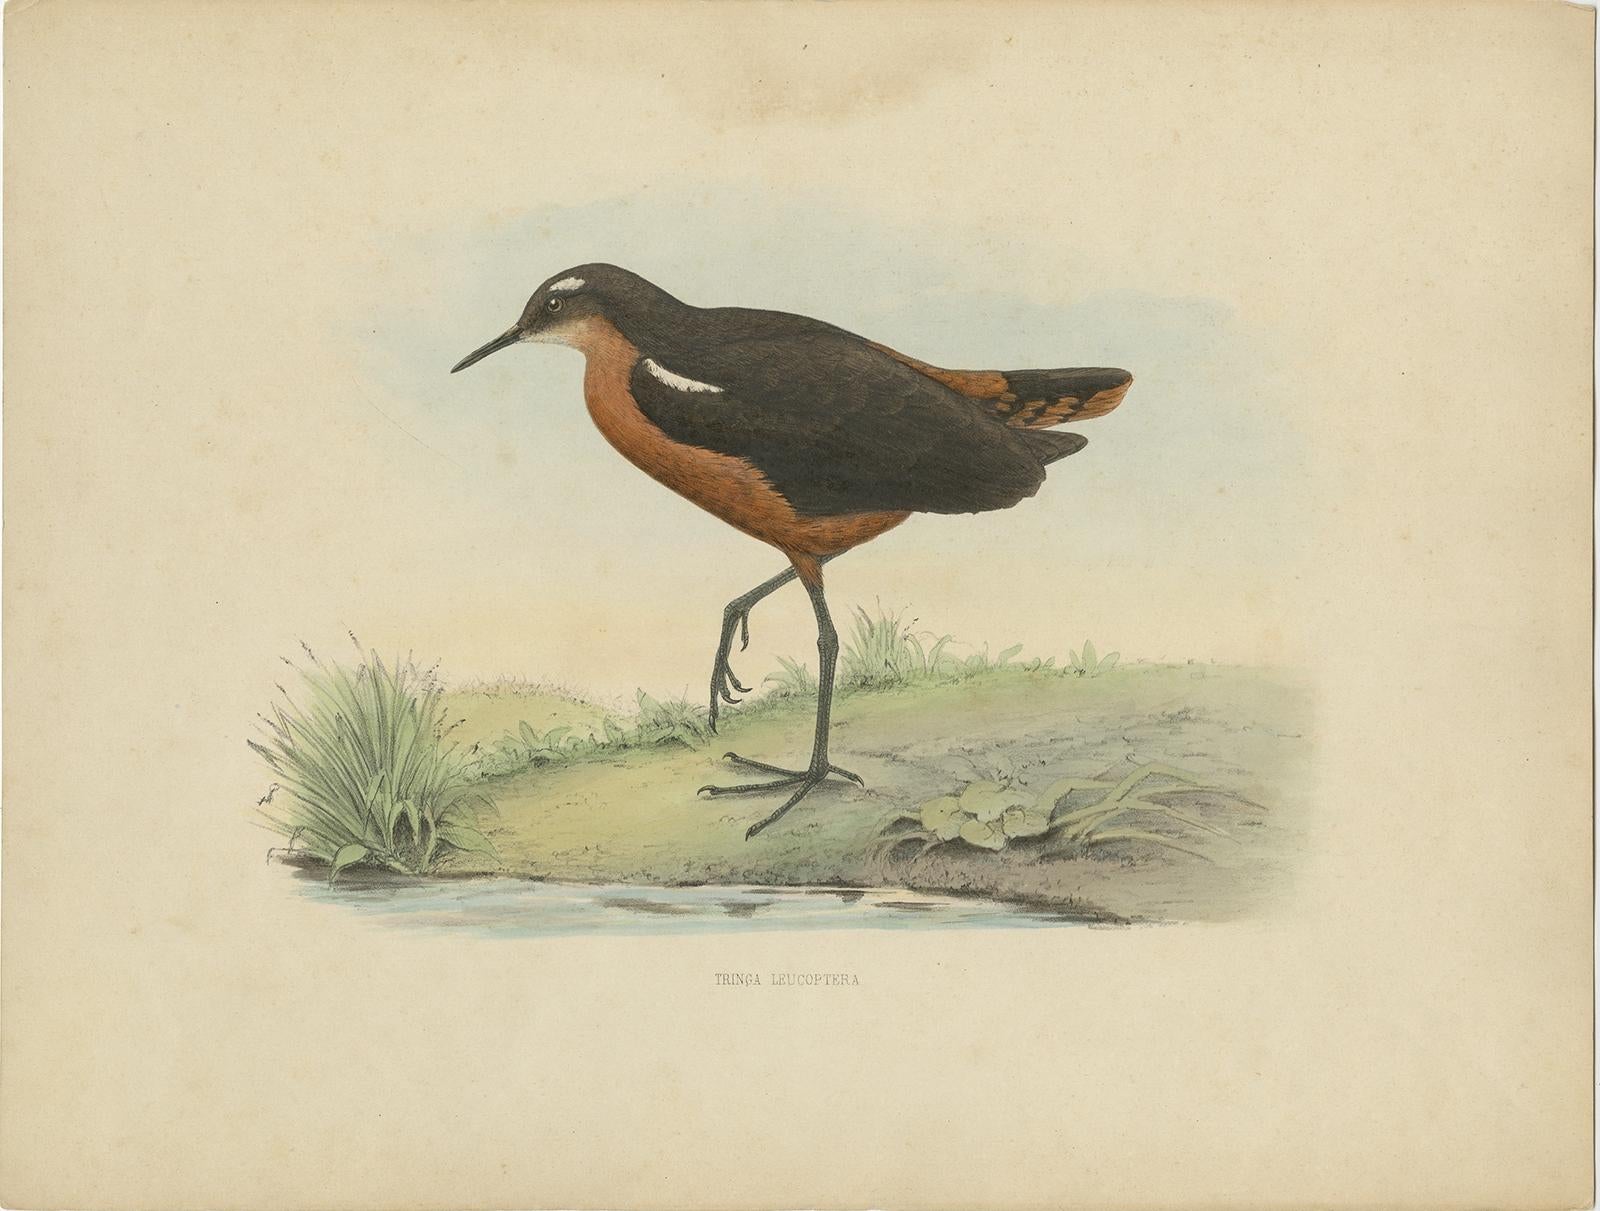 Antique print titled 'Tringa Leucoptera'. 

Old bird print of the Tahiti sandpiper or Tahitian sandpiper (Prosobonia leucoptera). This print originates from 'Bijdragen tot de Dierkunde' by G.F. Westerman. 

Artists and Engravers: Gerardus